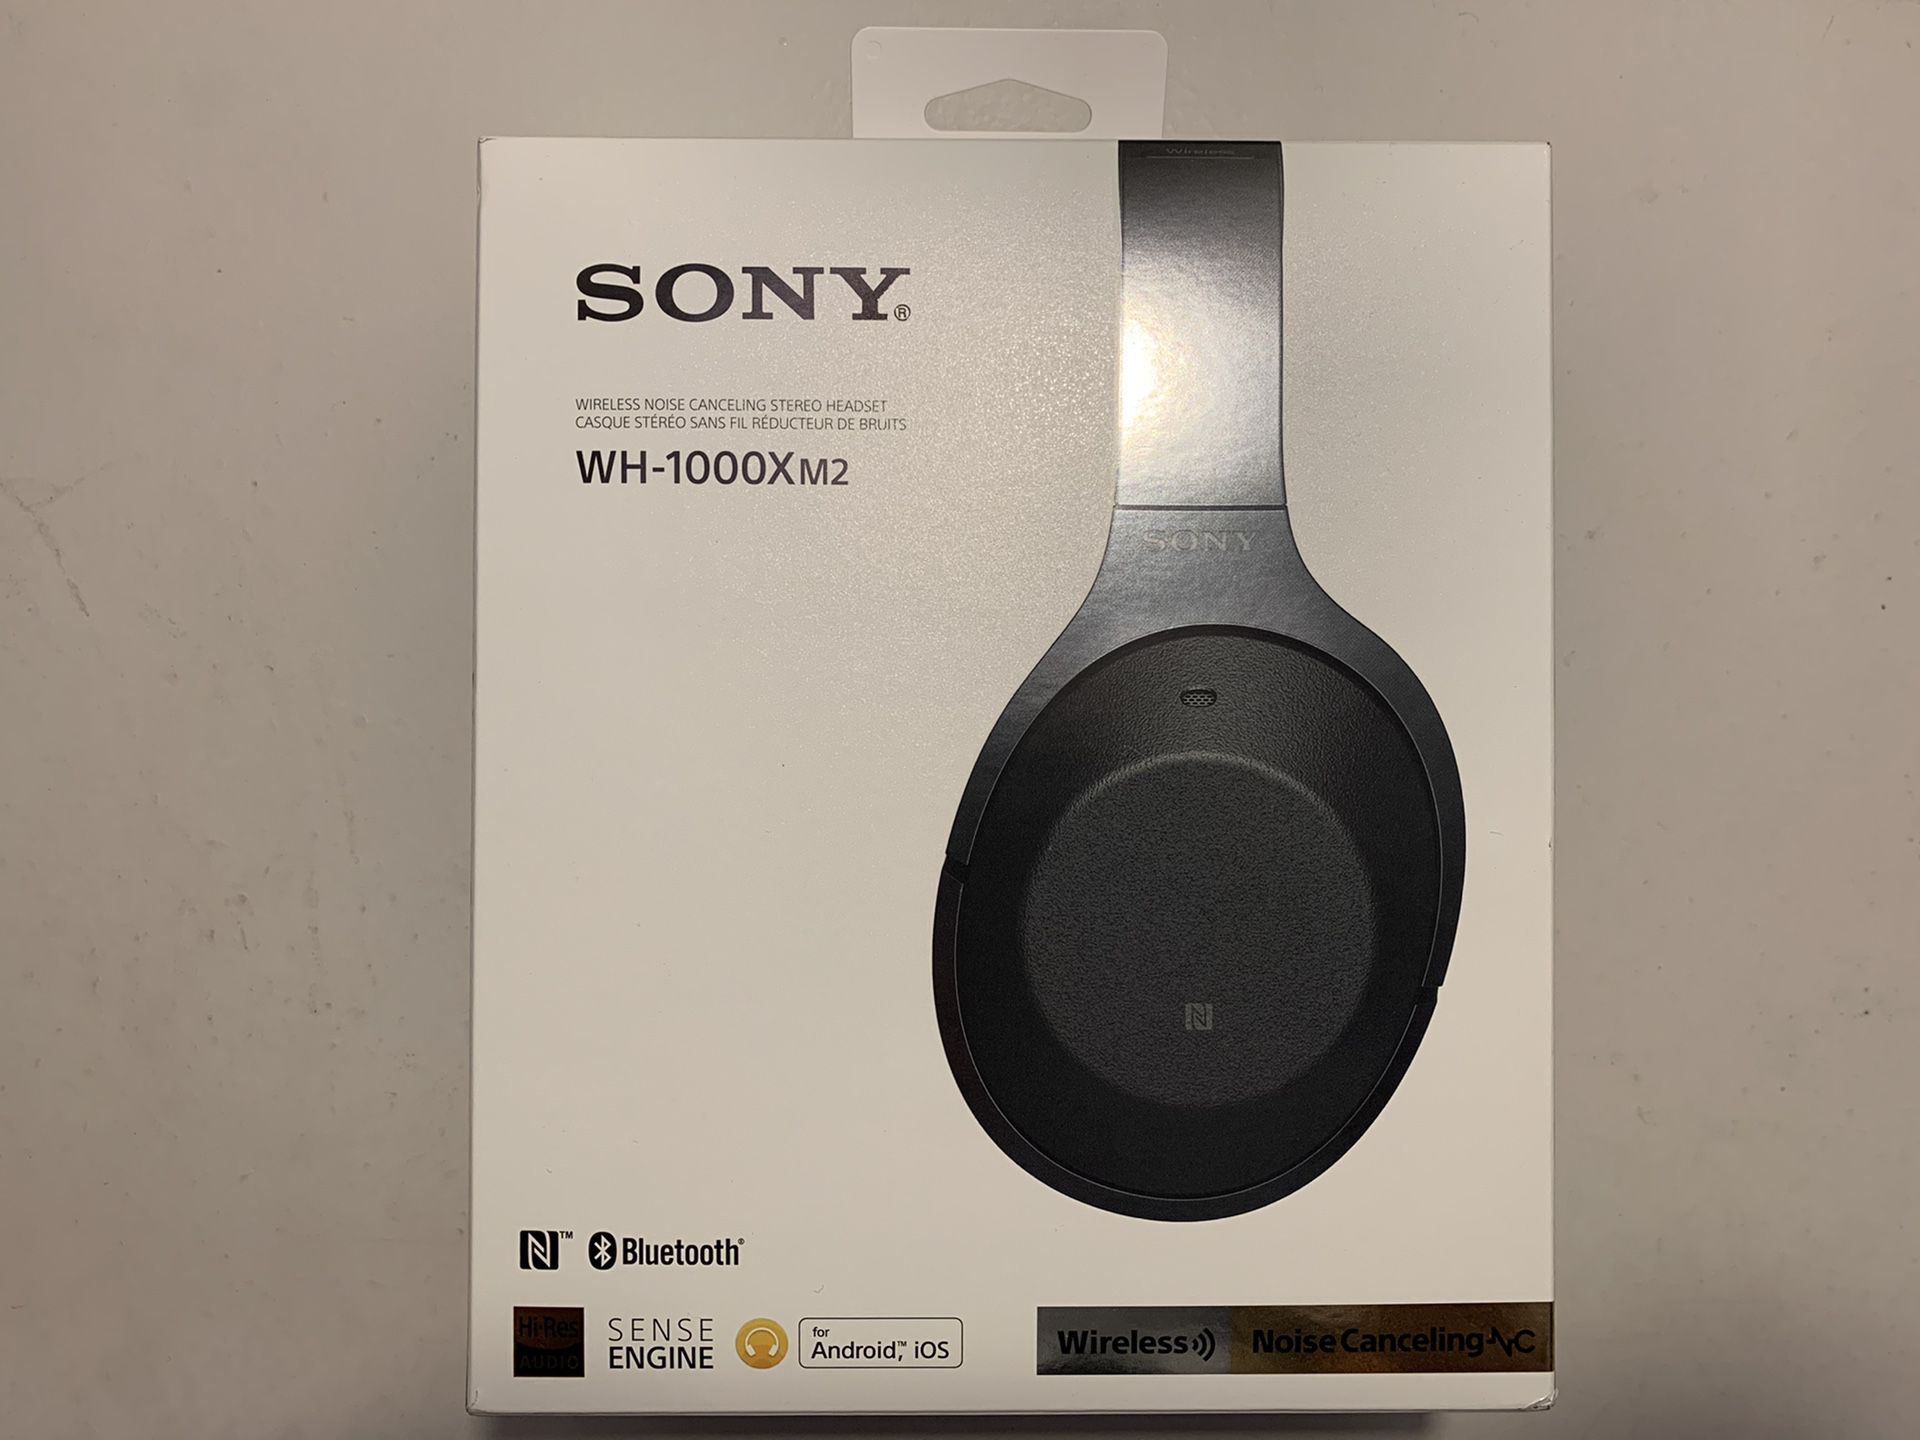 Sony WH-1000XM2 Wirless Noise Cancelling Headphones